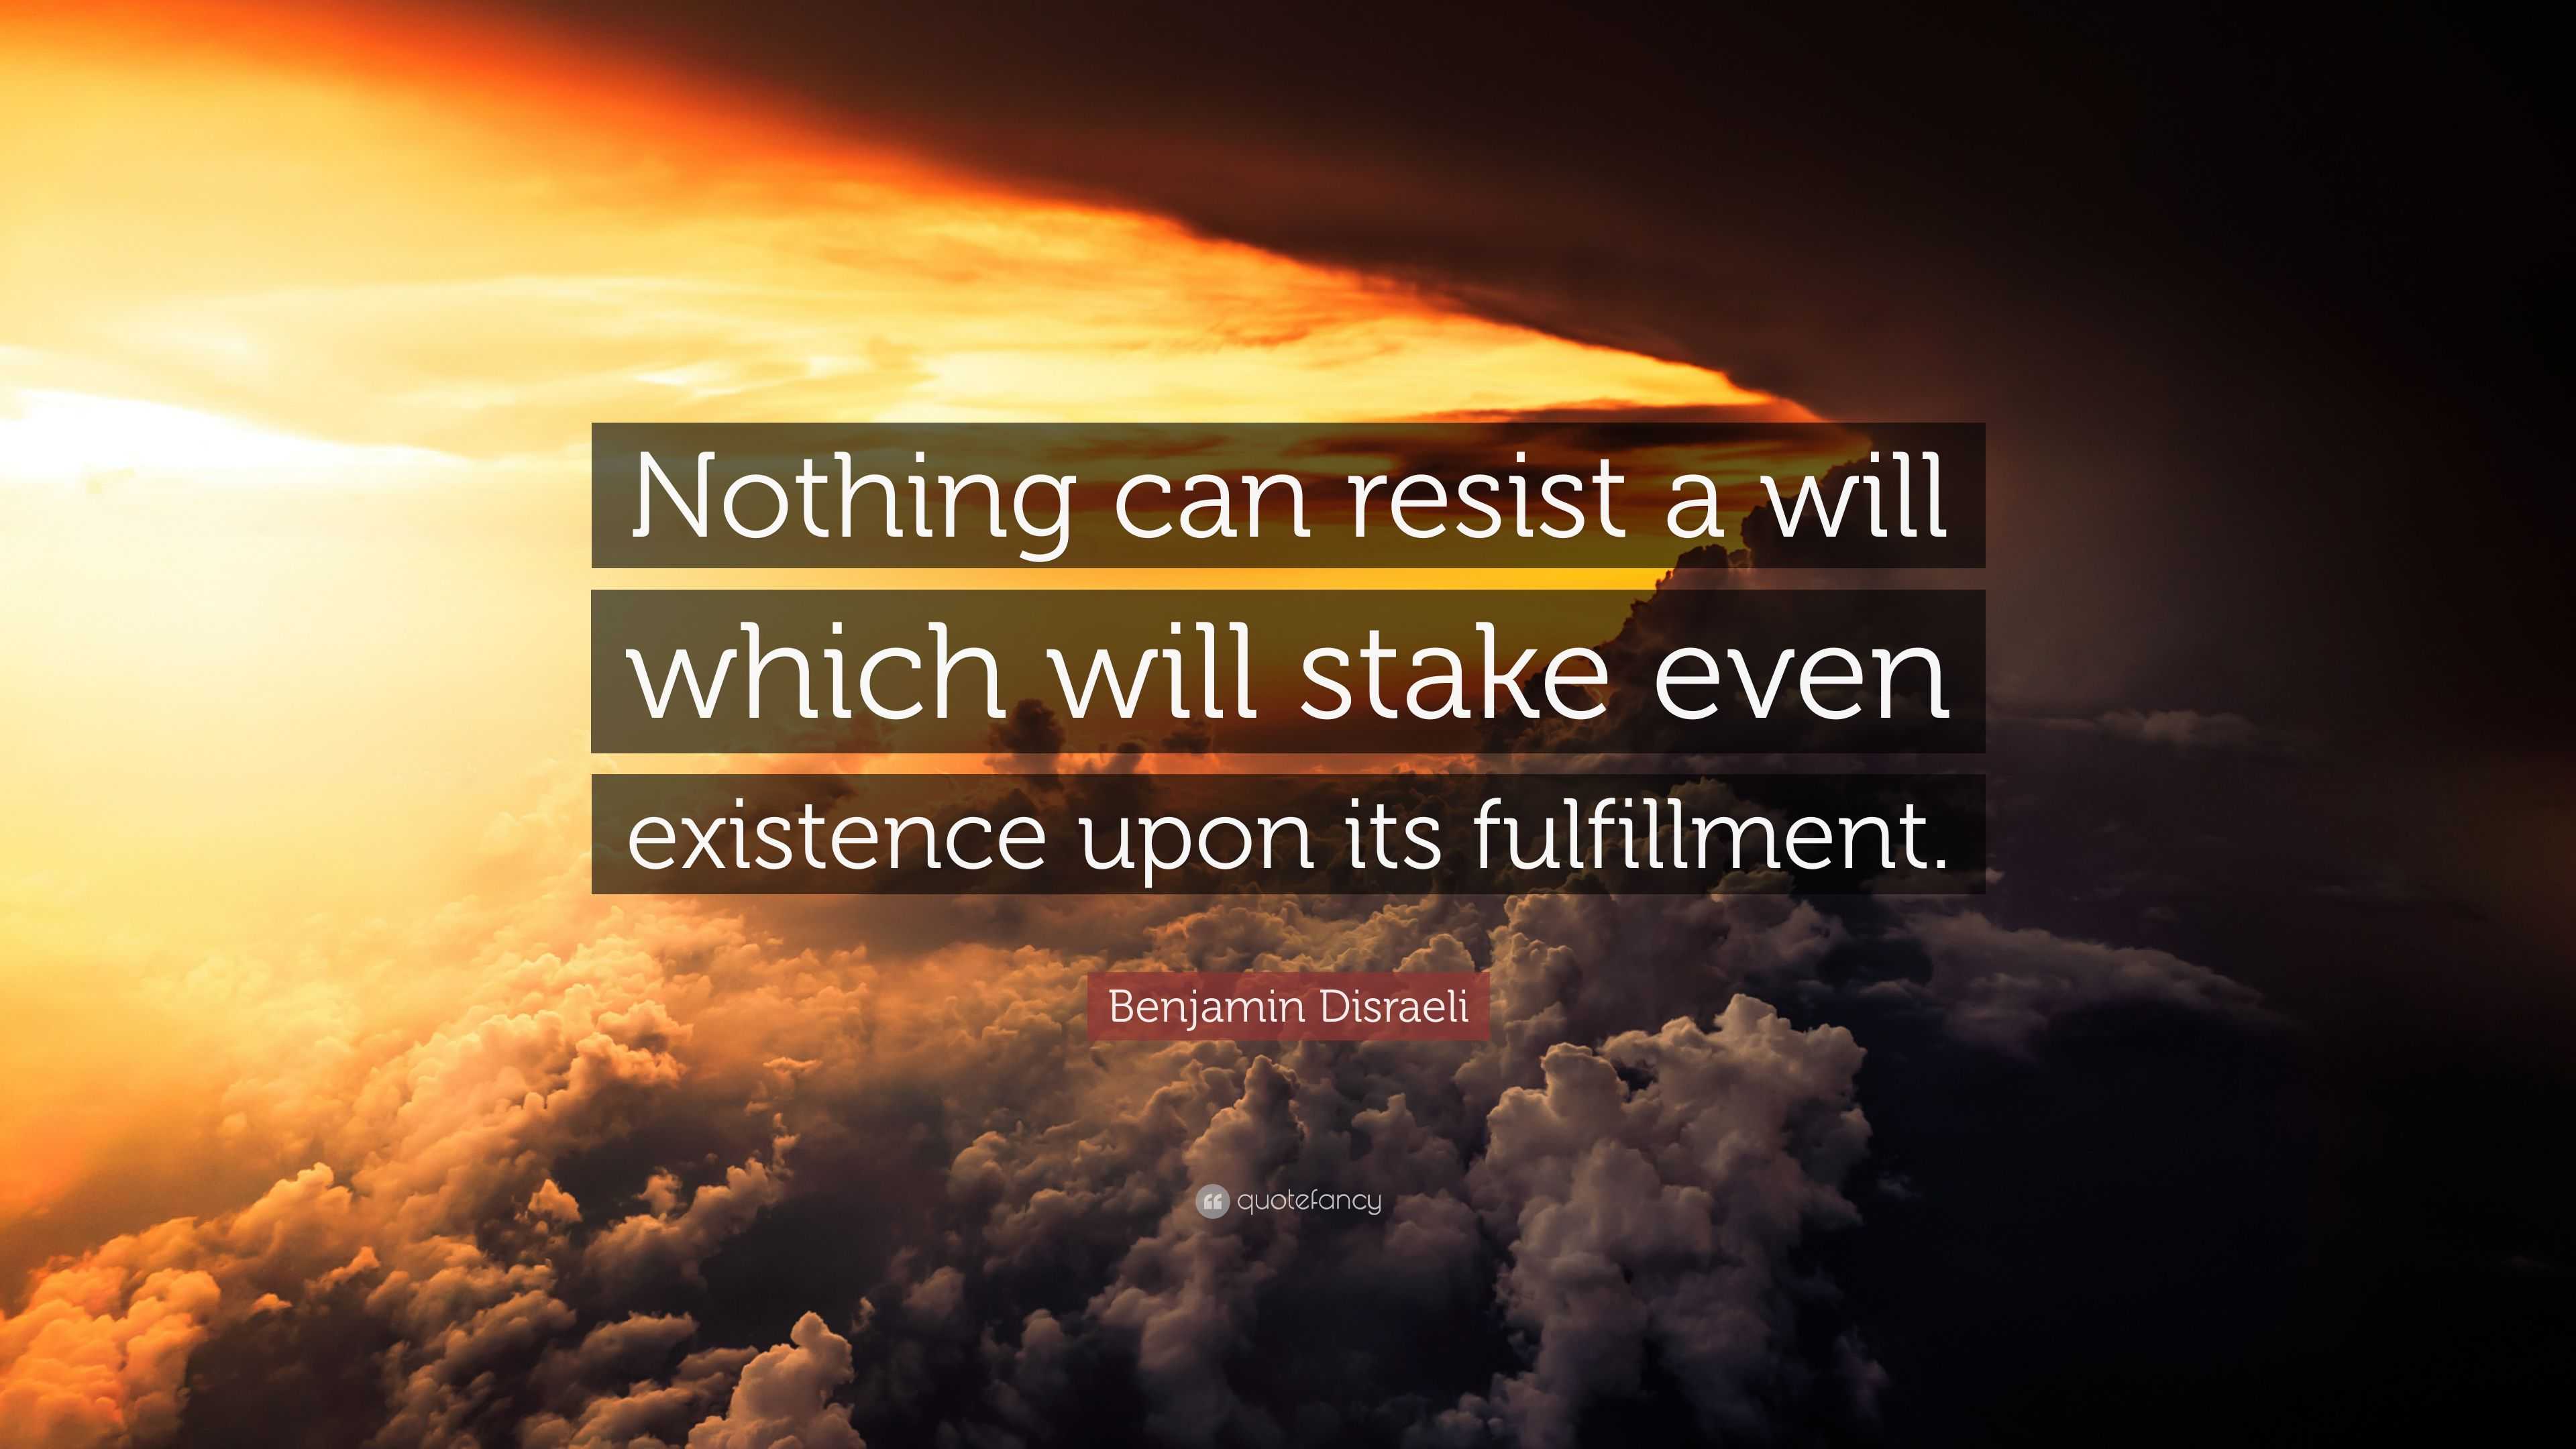 Benjamin Disraeli Quote: “Nothing can resist a will which will stake ...